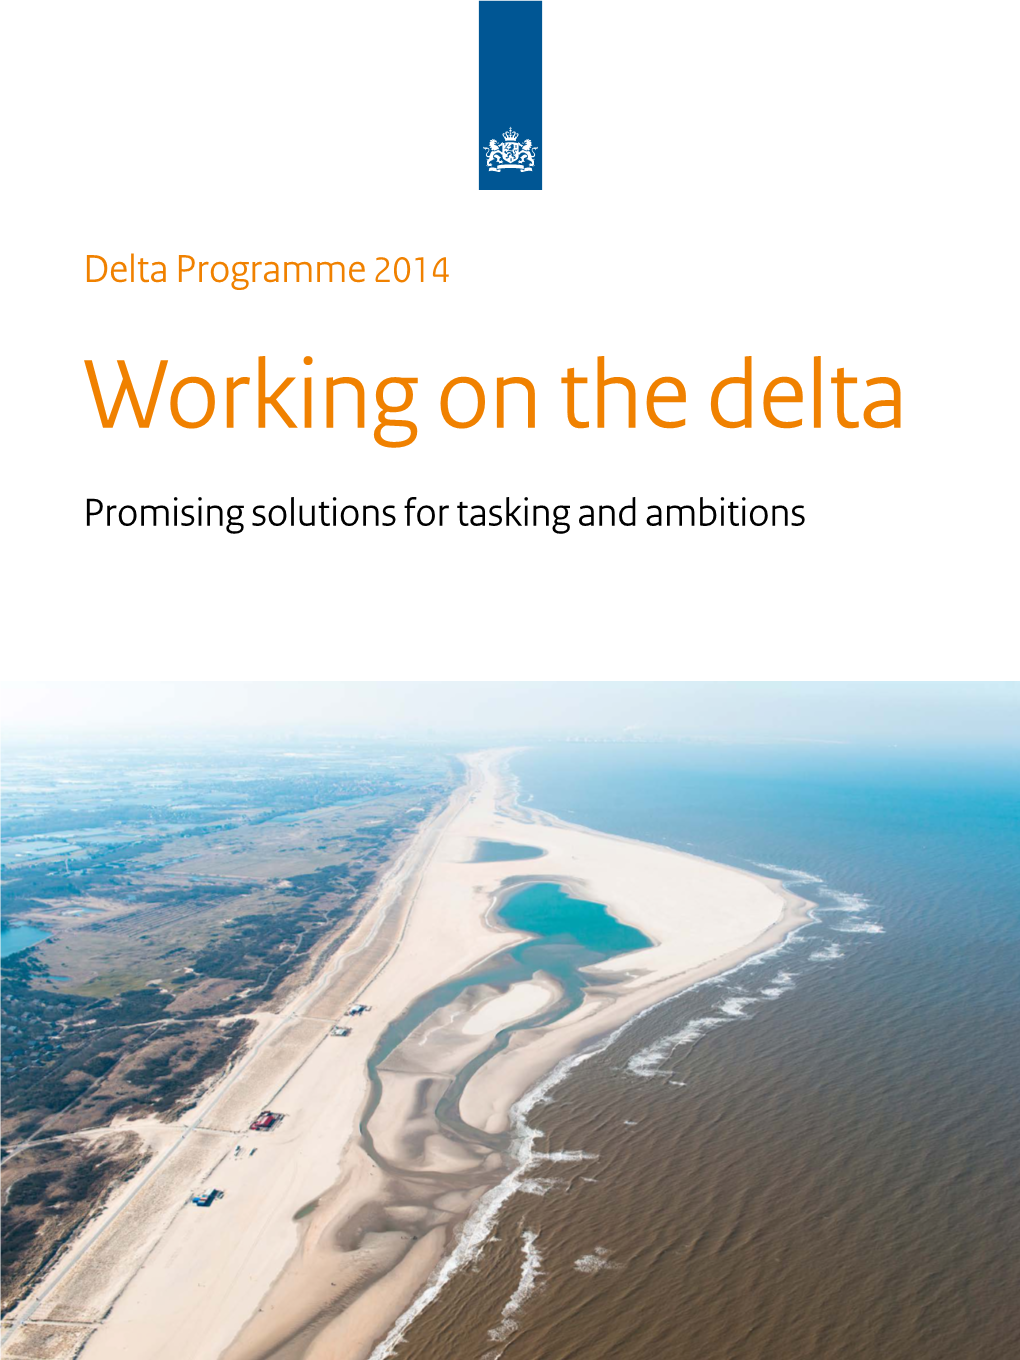 Delta Programme 2014 Working on the Delta Promising Solutions for Tasking and Ambitions Safety Freshwater New Urban Development and Restructuring